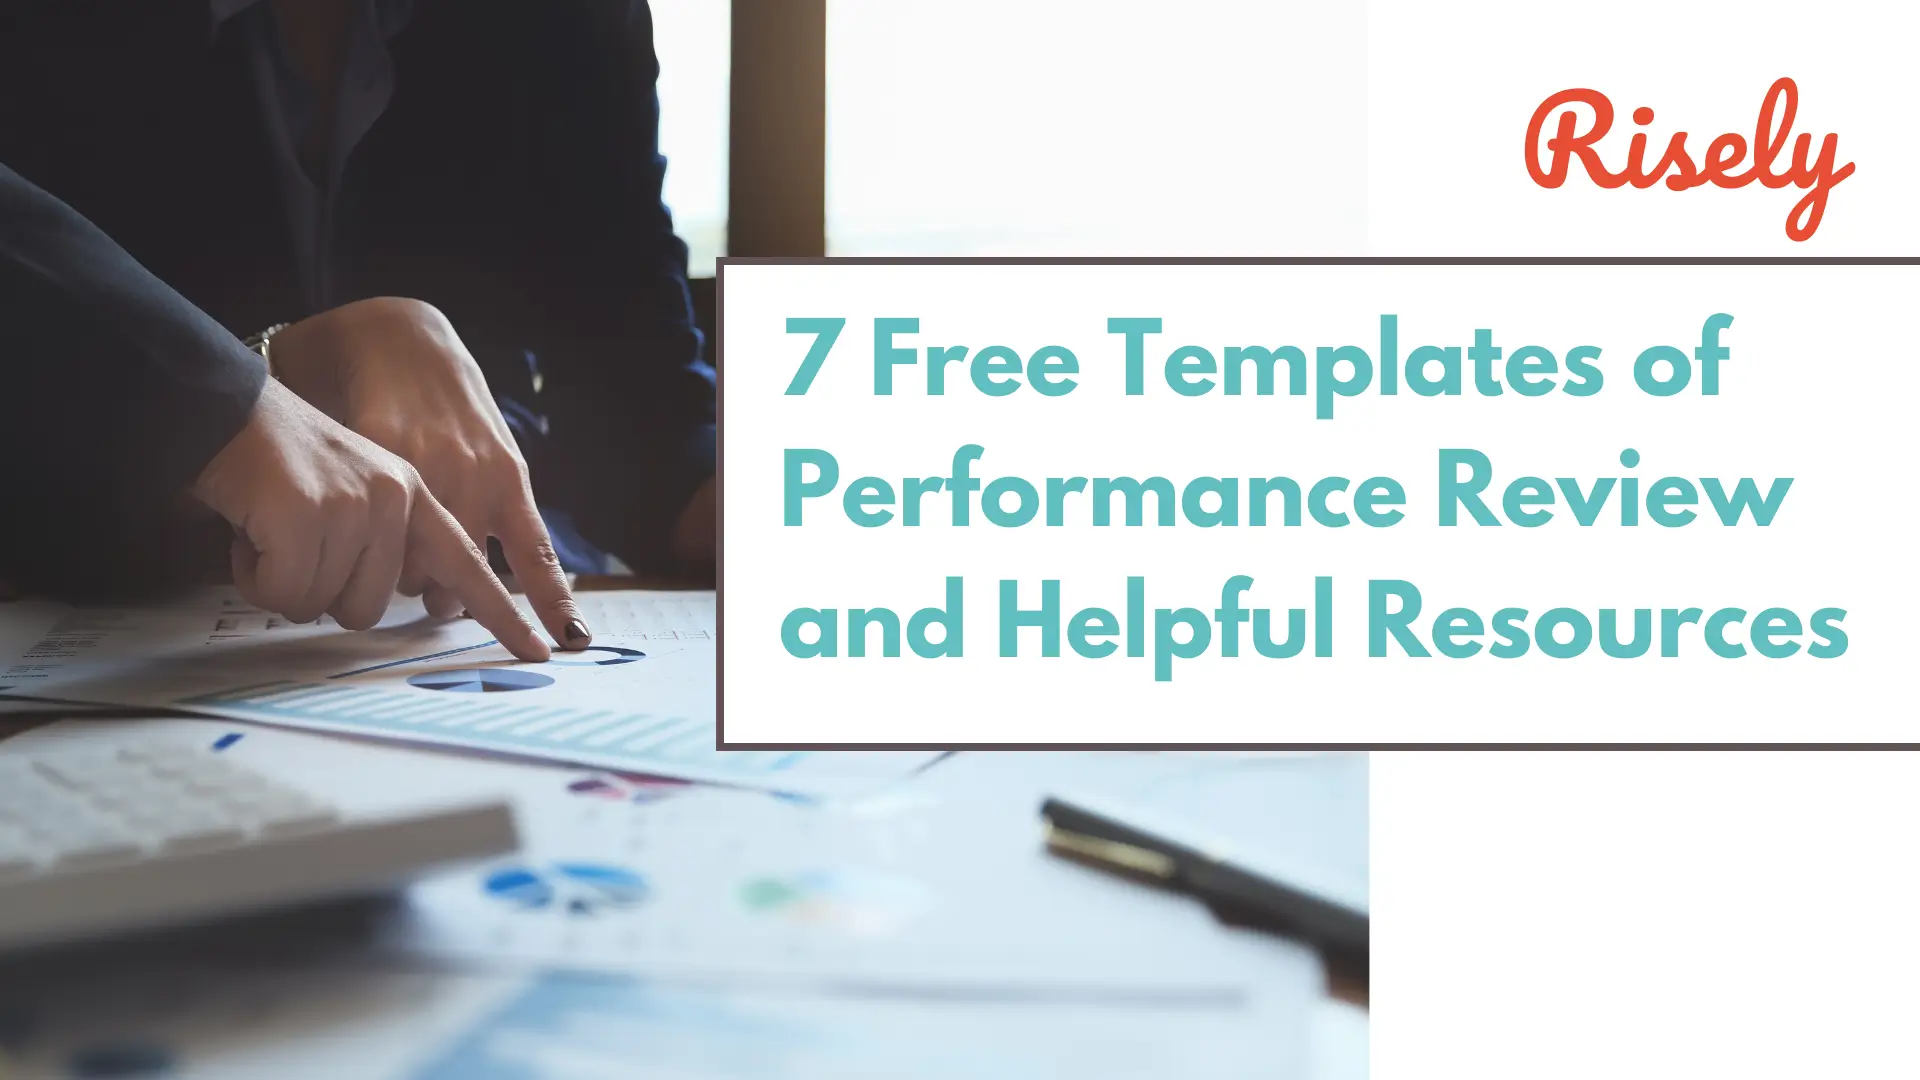 7 Free Templates of Performance Review and Helpful Resources